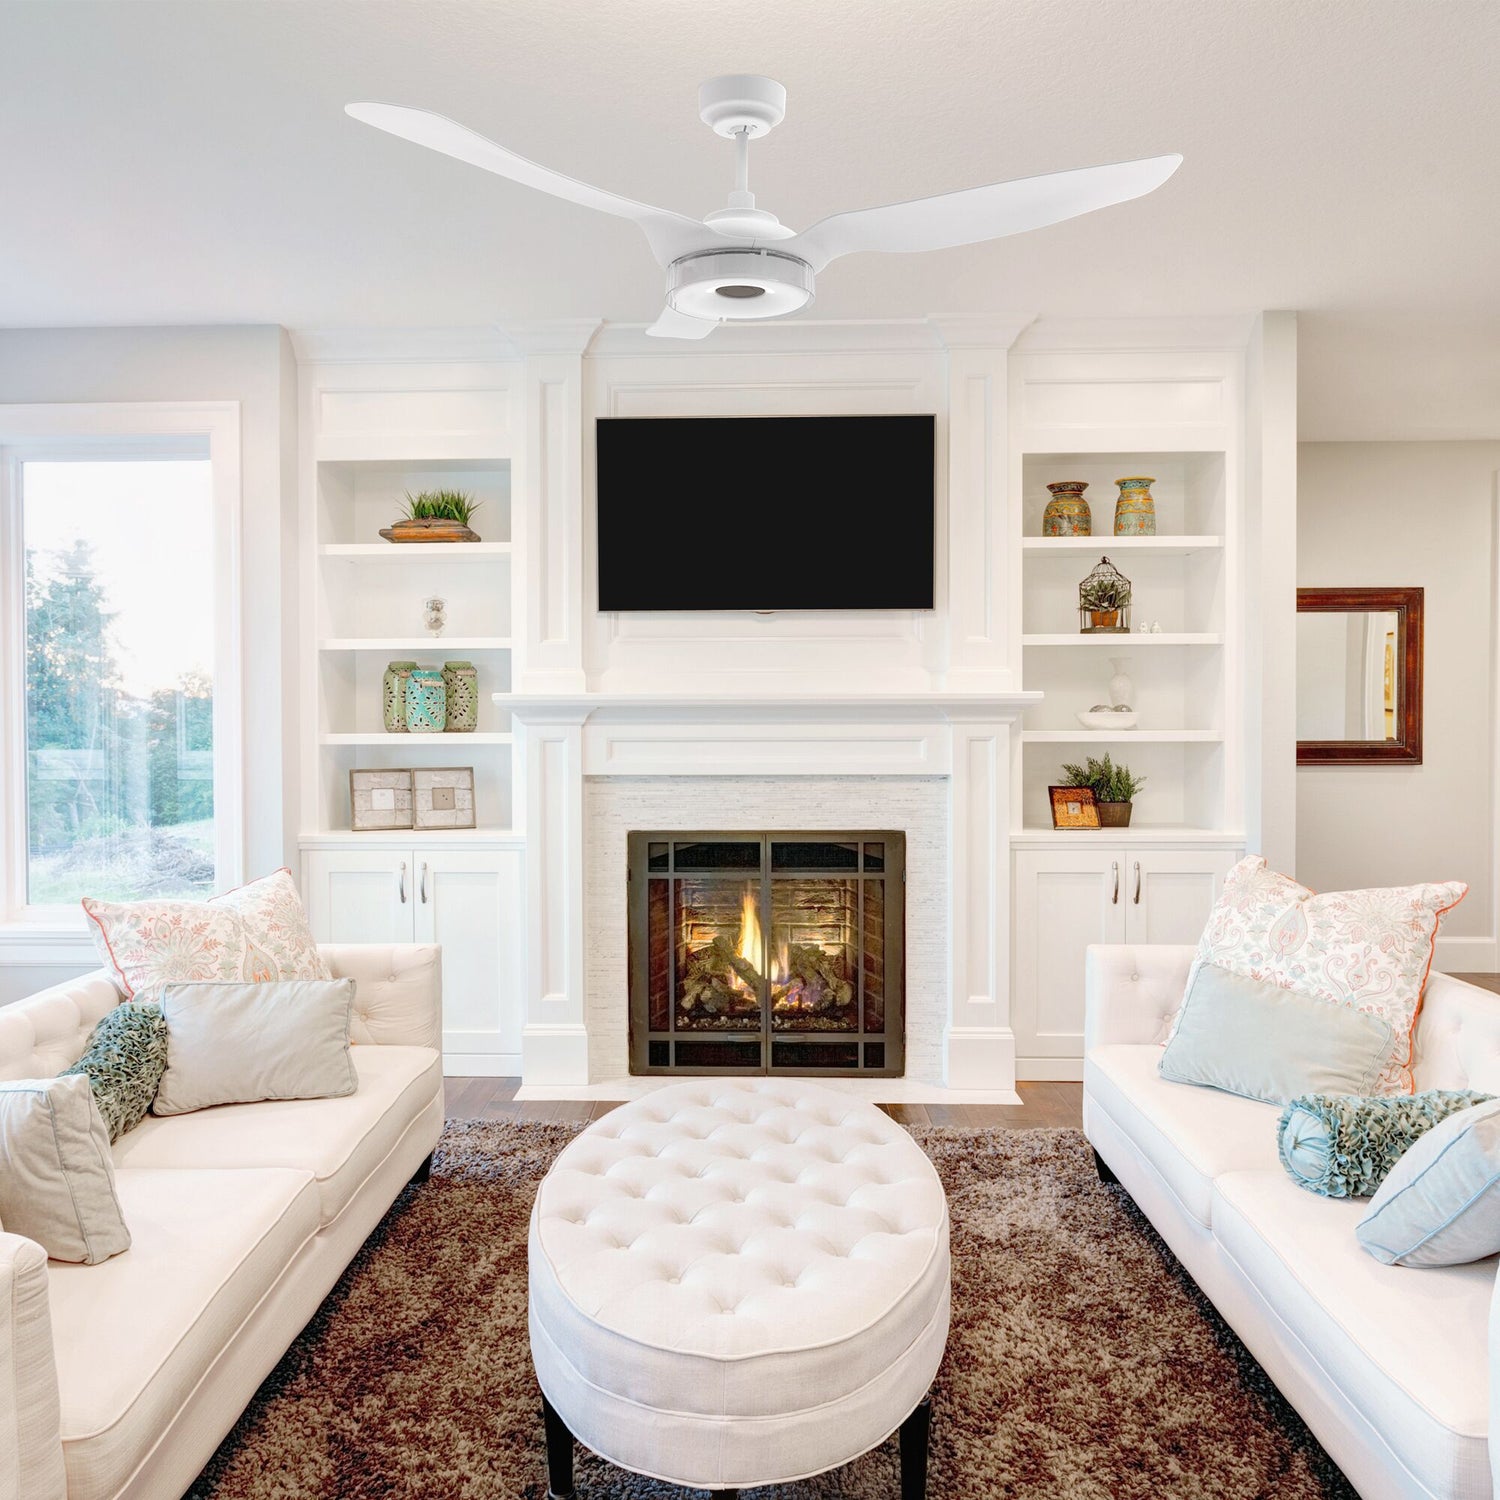 Icebreaker 60‘’ smart fan delivers high and energy-efficient airflow in a sleek design. With dimmable integrated LED, 10-speed whisper-quiet DC motor, available remote, phone app, and voice integration control, and airfoils in classic white, Icebreaker helps you enjoy your better life.